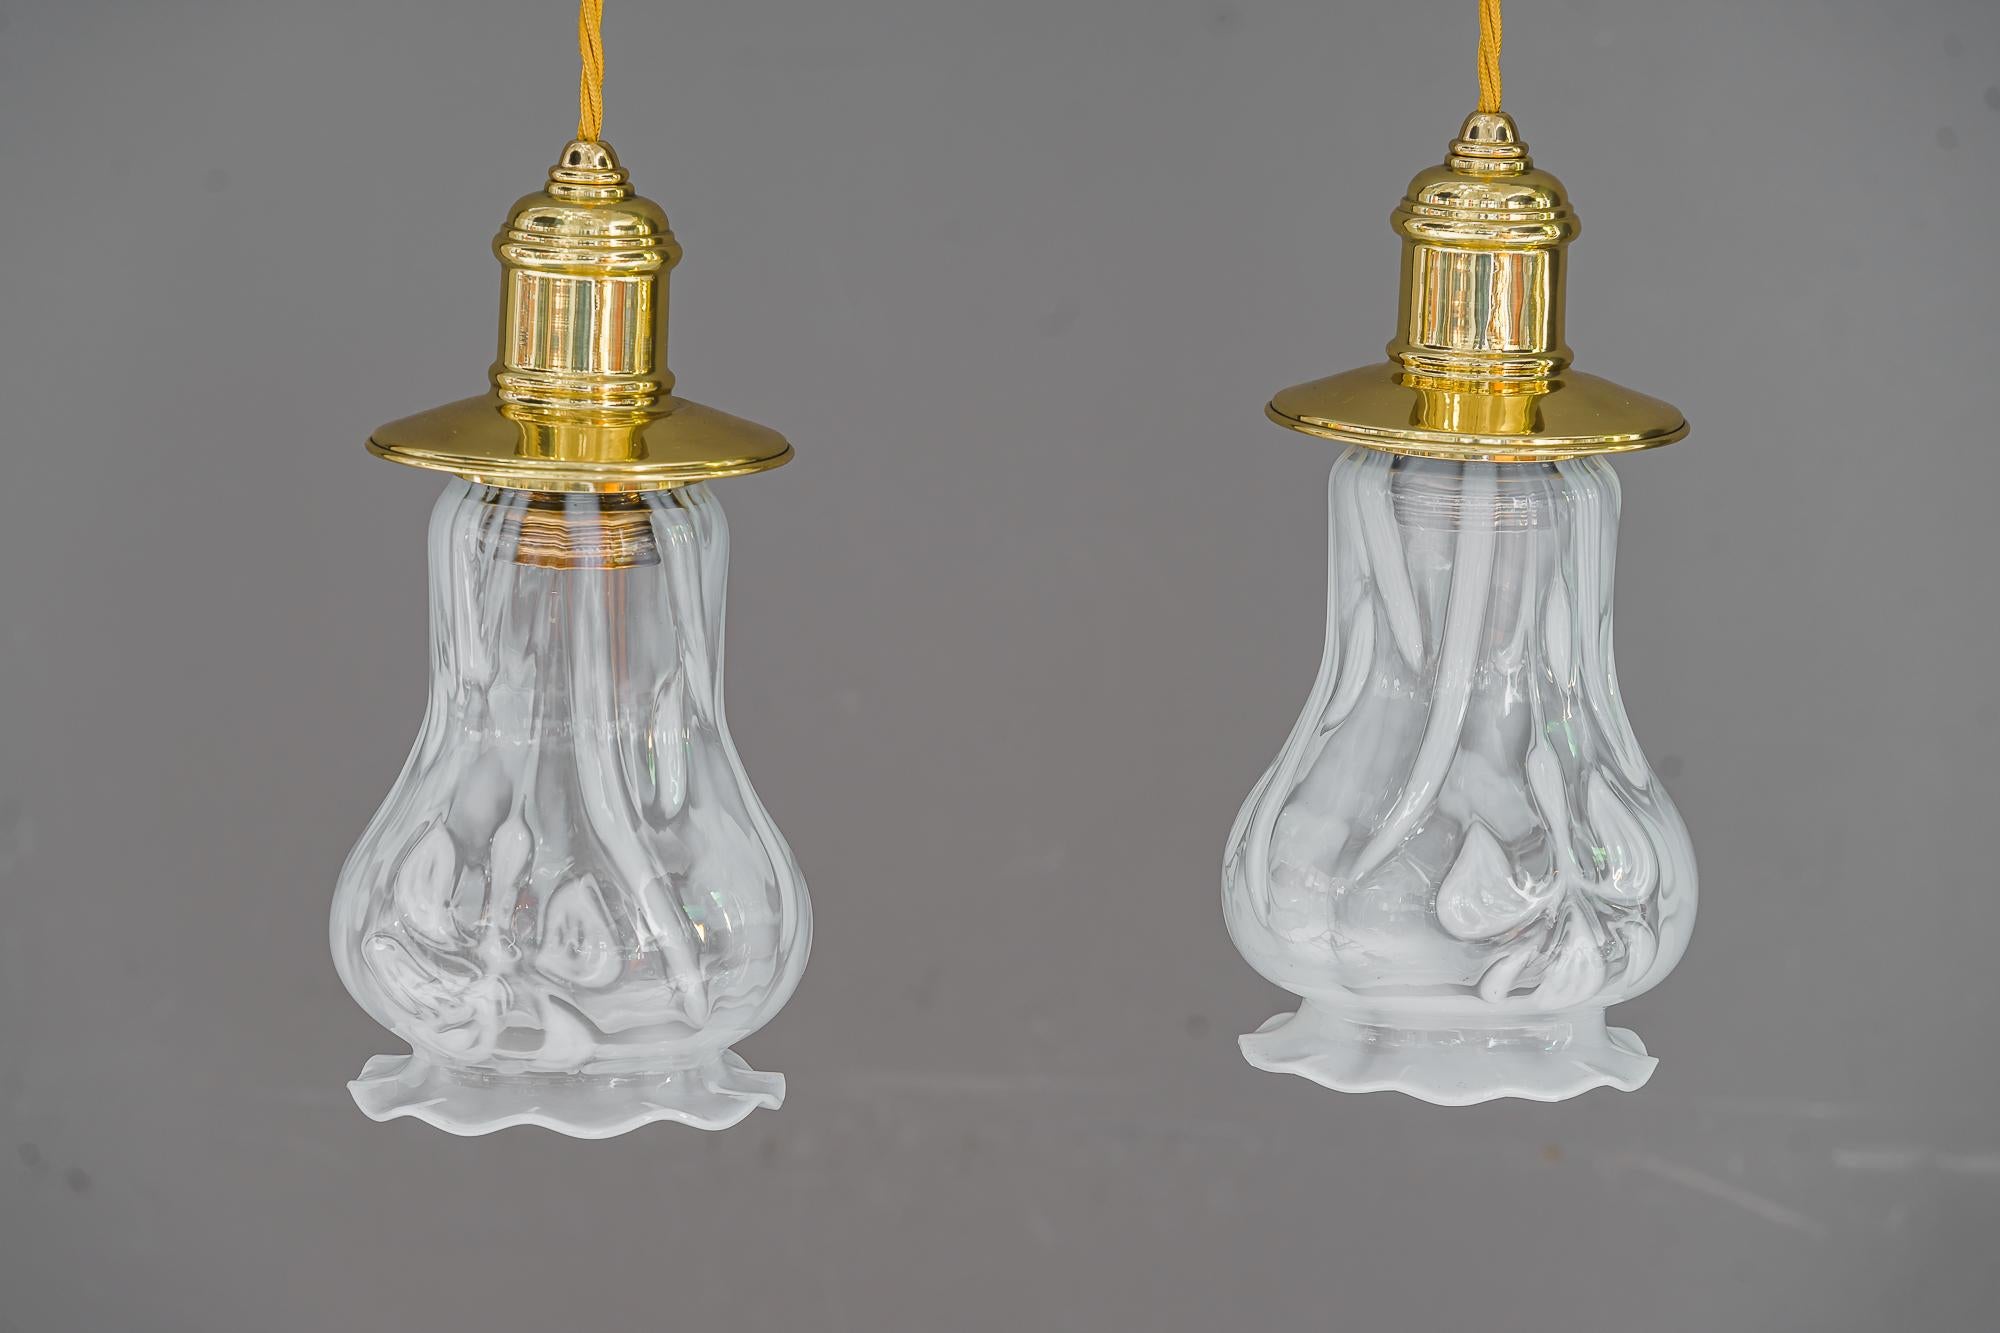 2 Art Deco pendants vienna around 1920s with opaline glass shades.
Brass polished and stove enameled.
Original old opaline glass shades.